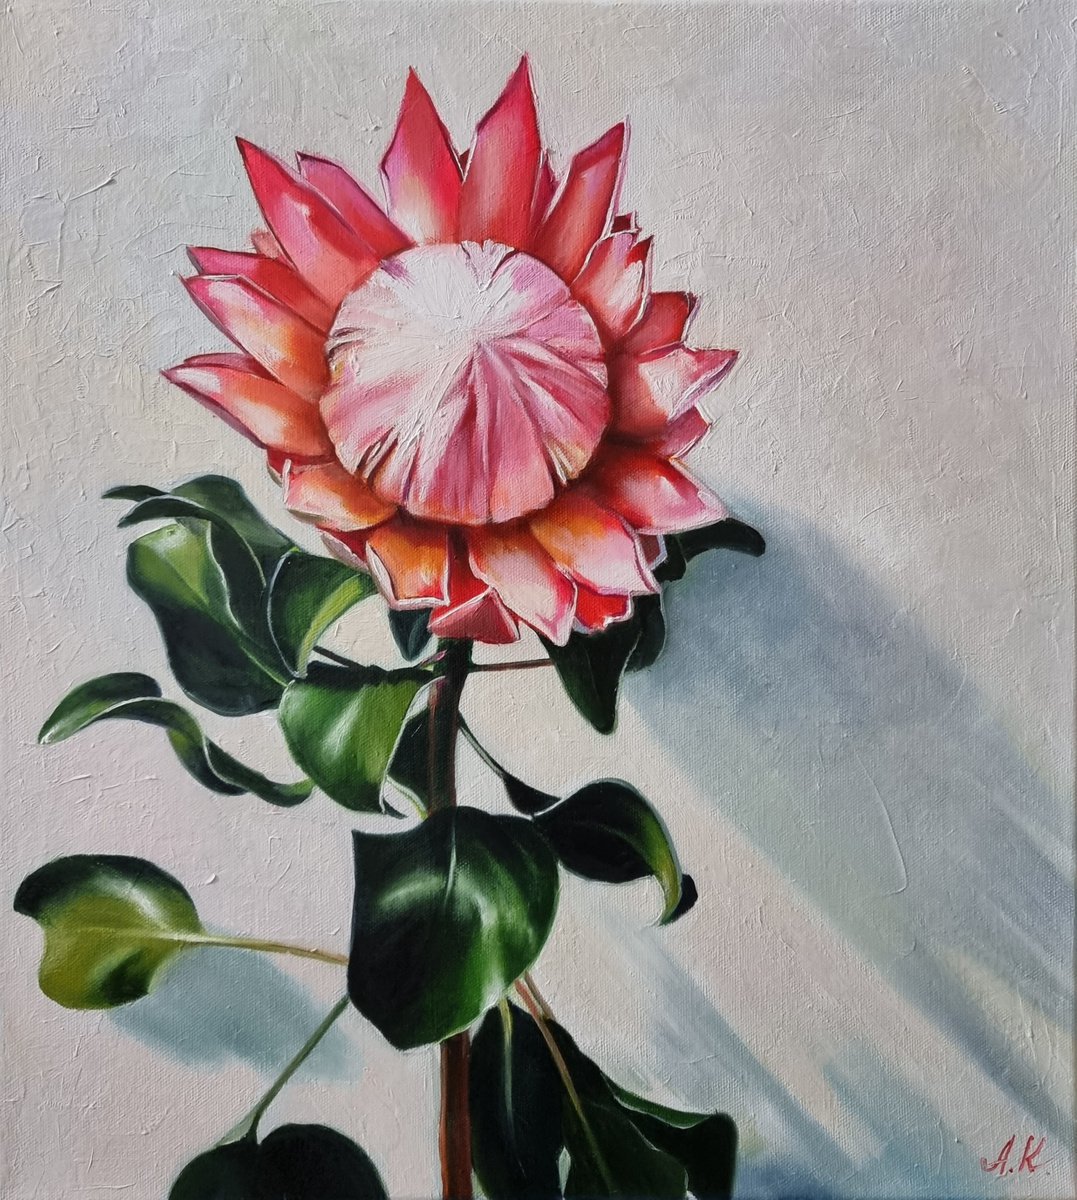 About the African rose. still life summer Protea flower liGHt original painting GIFT ( by Anna Kotelnik